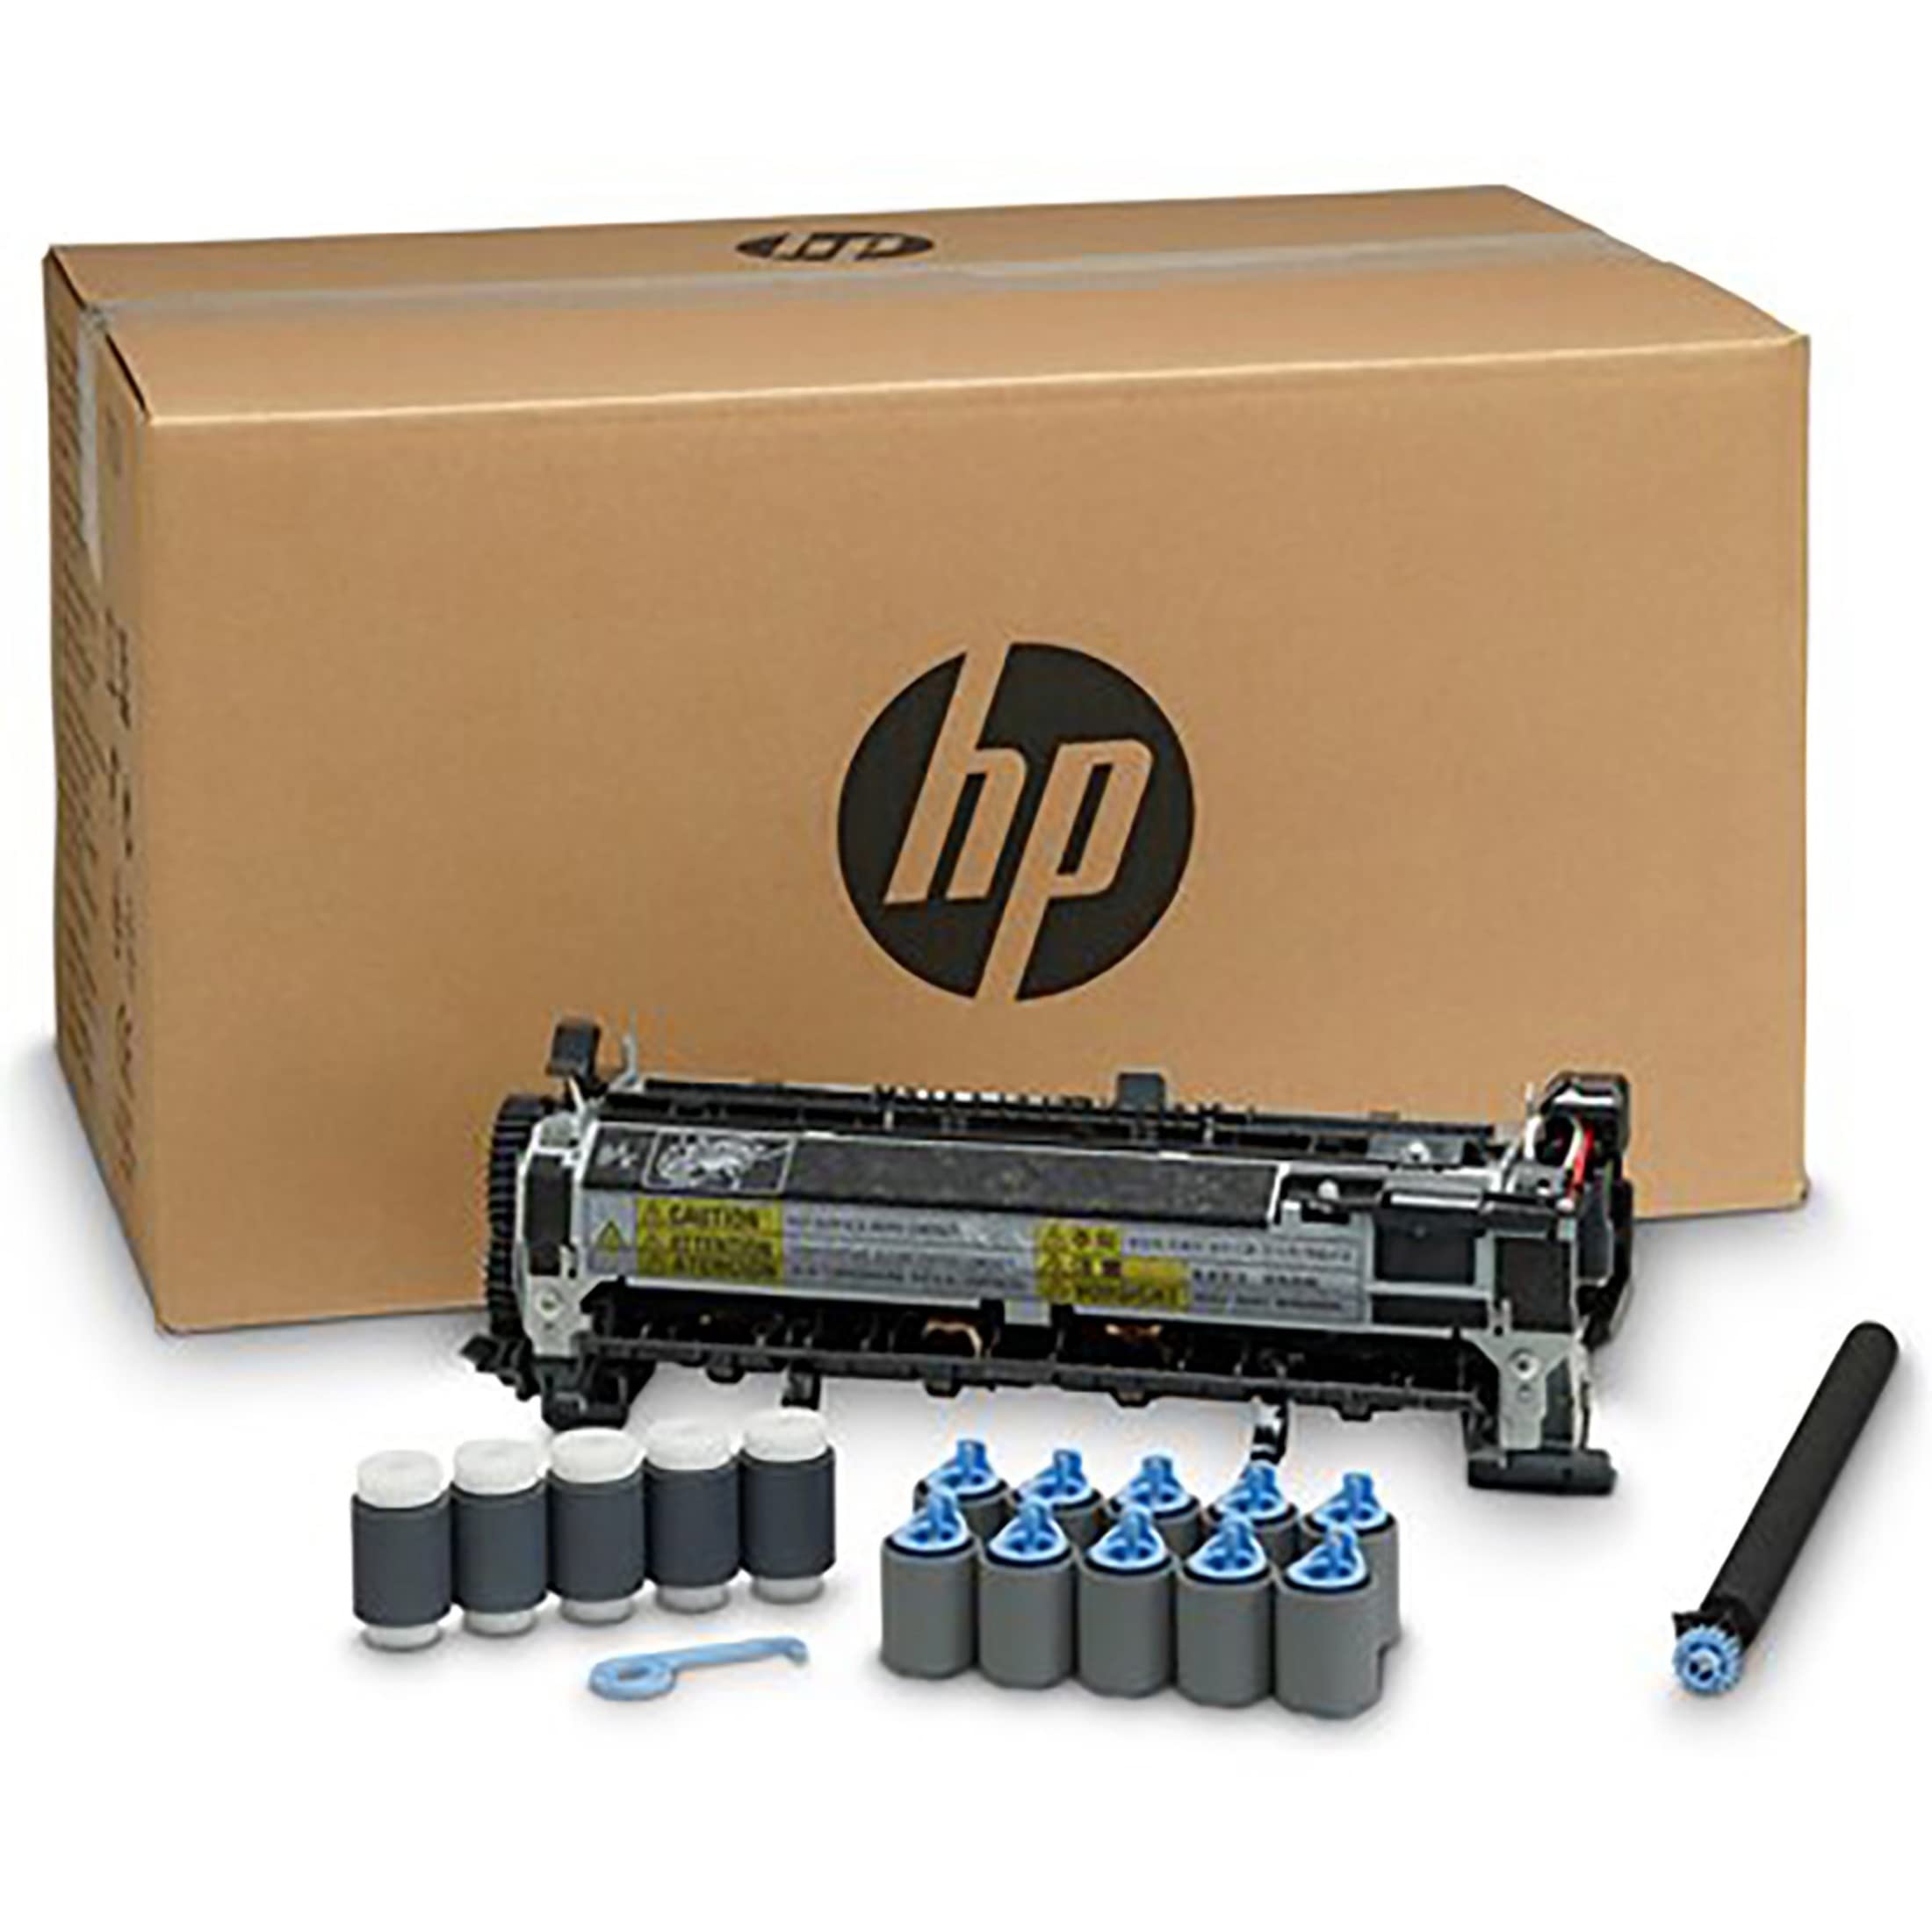 HP 、HEWF2G76A、Laserjet 110V メンテナンス キット、F2G76A、各 1...